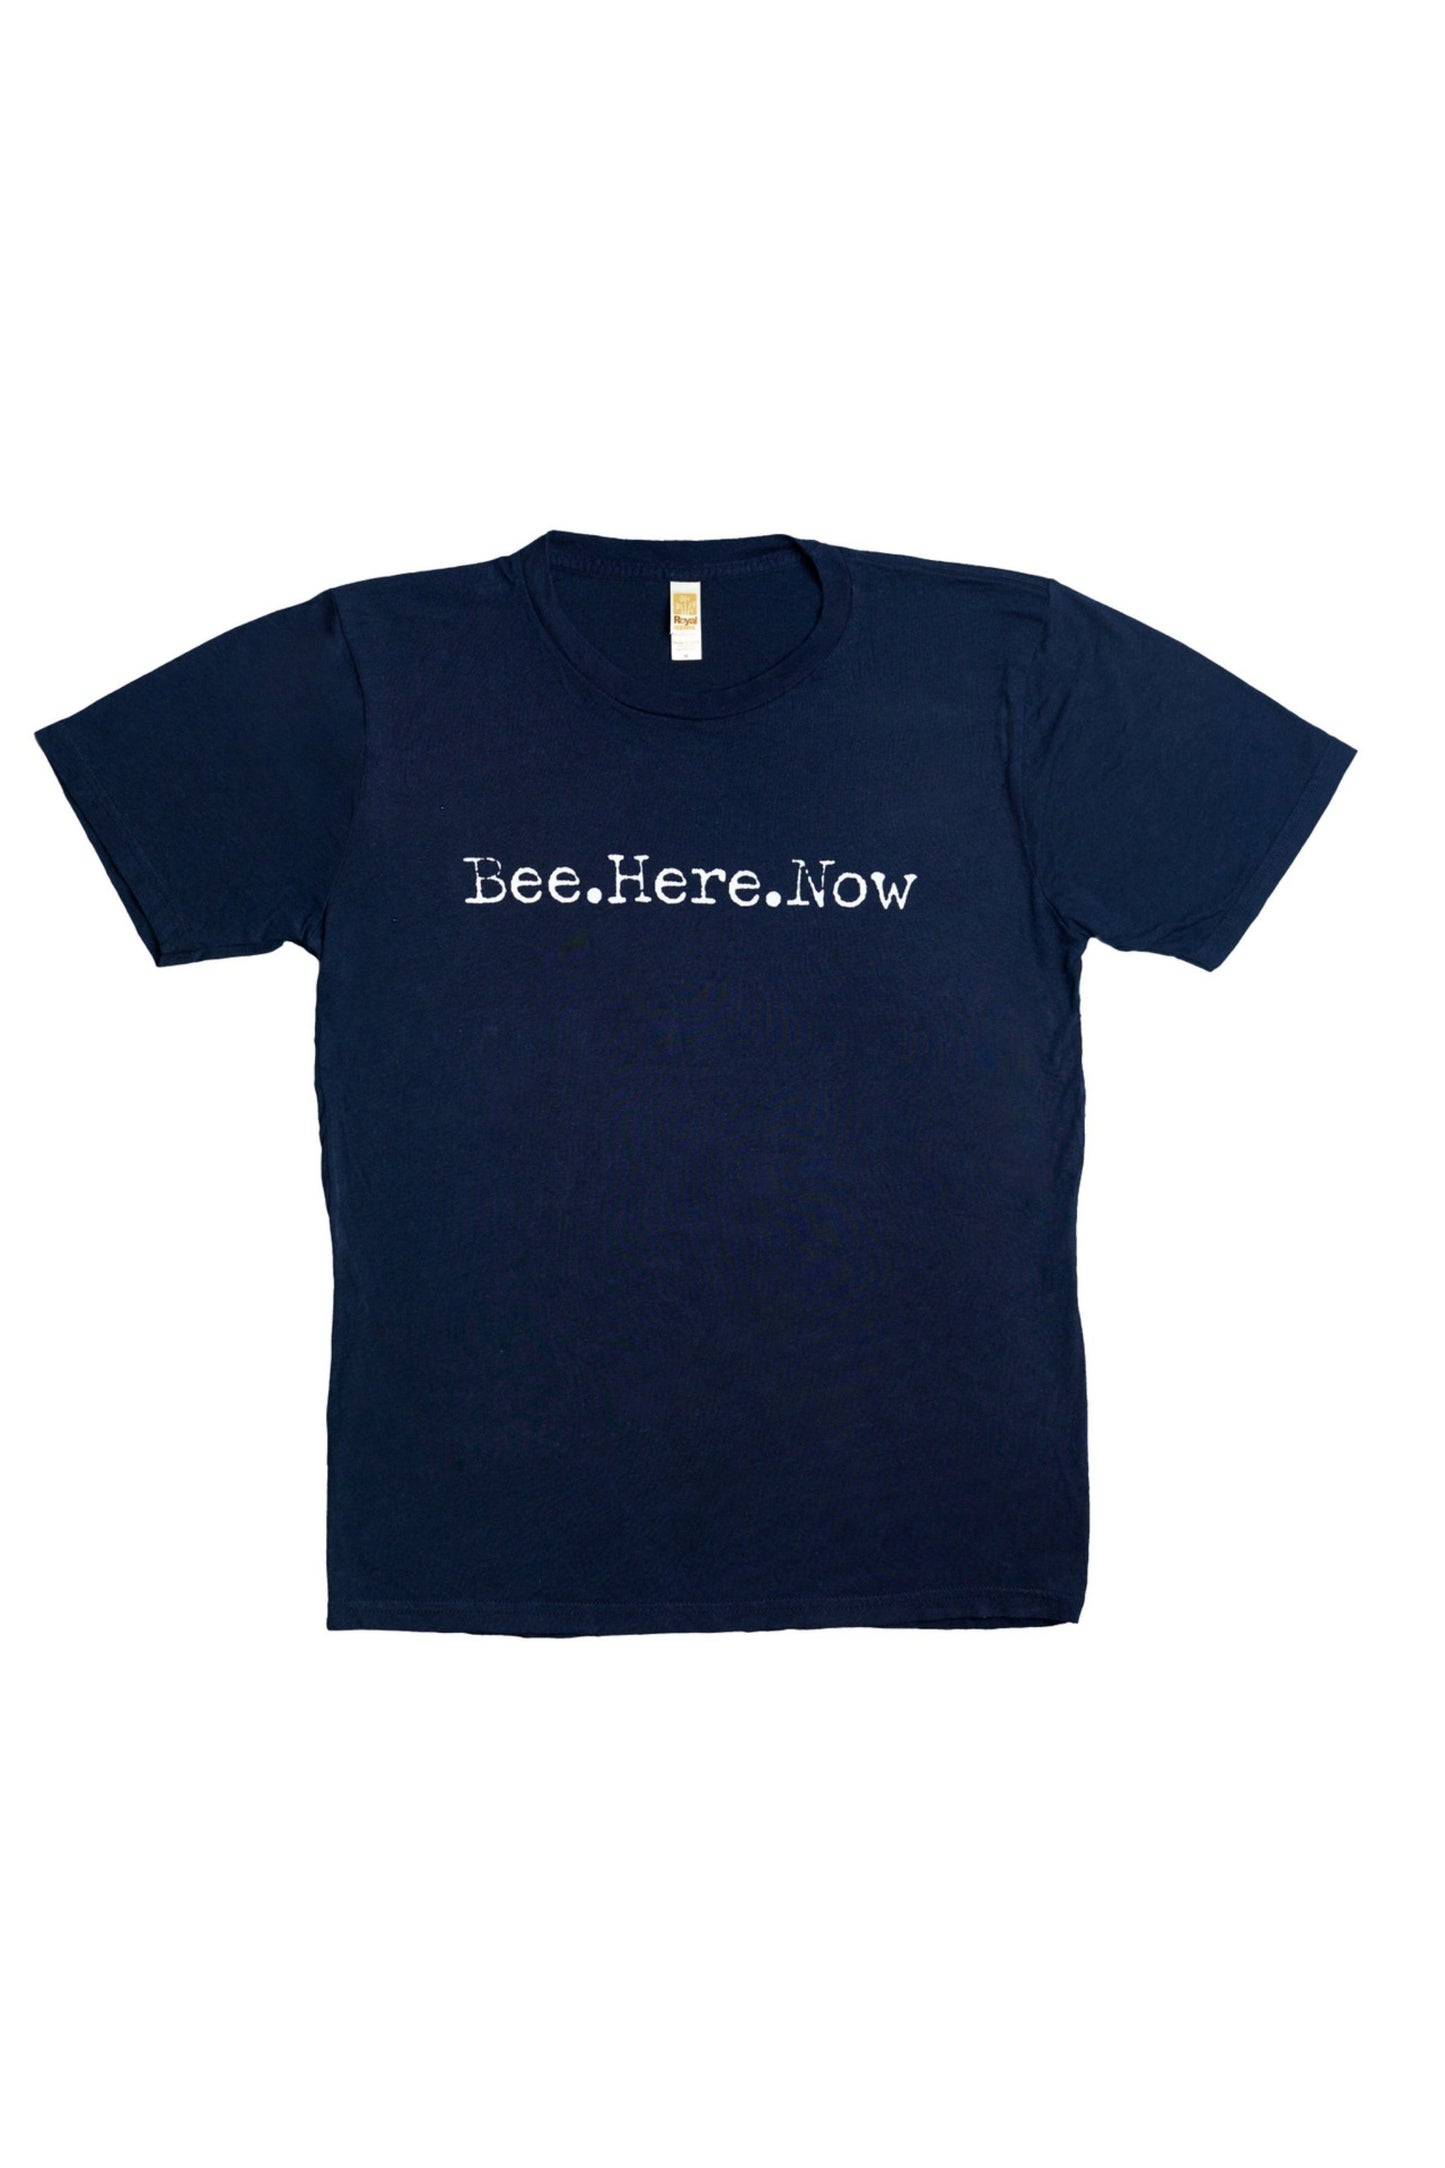 Short sleeve, navy, crew neck thsirt. Front of the shirt has the saying Bee Here Now in white lettering. 